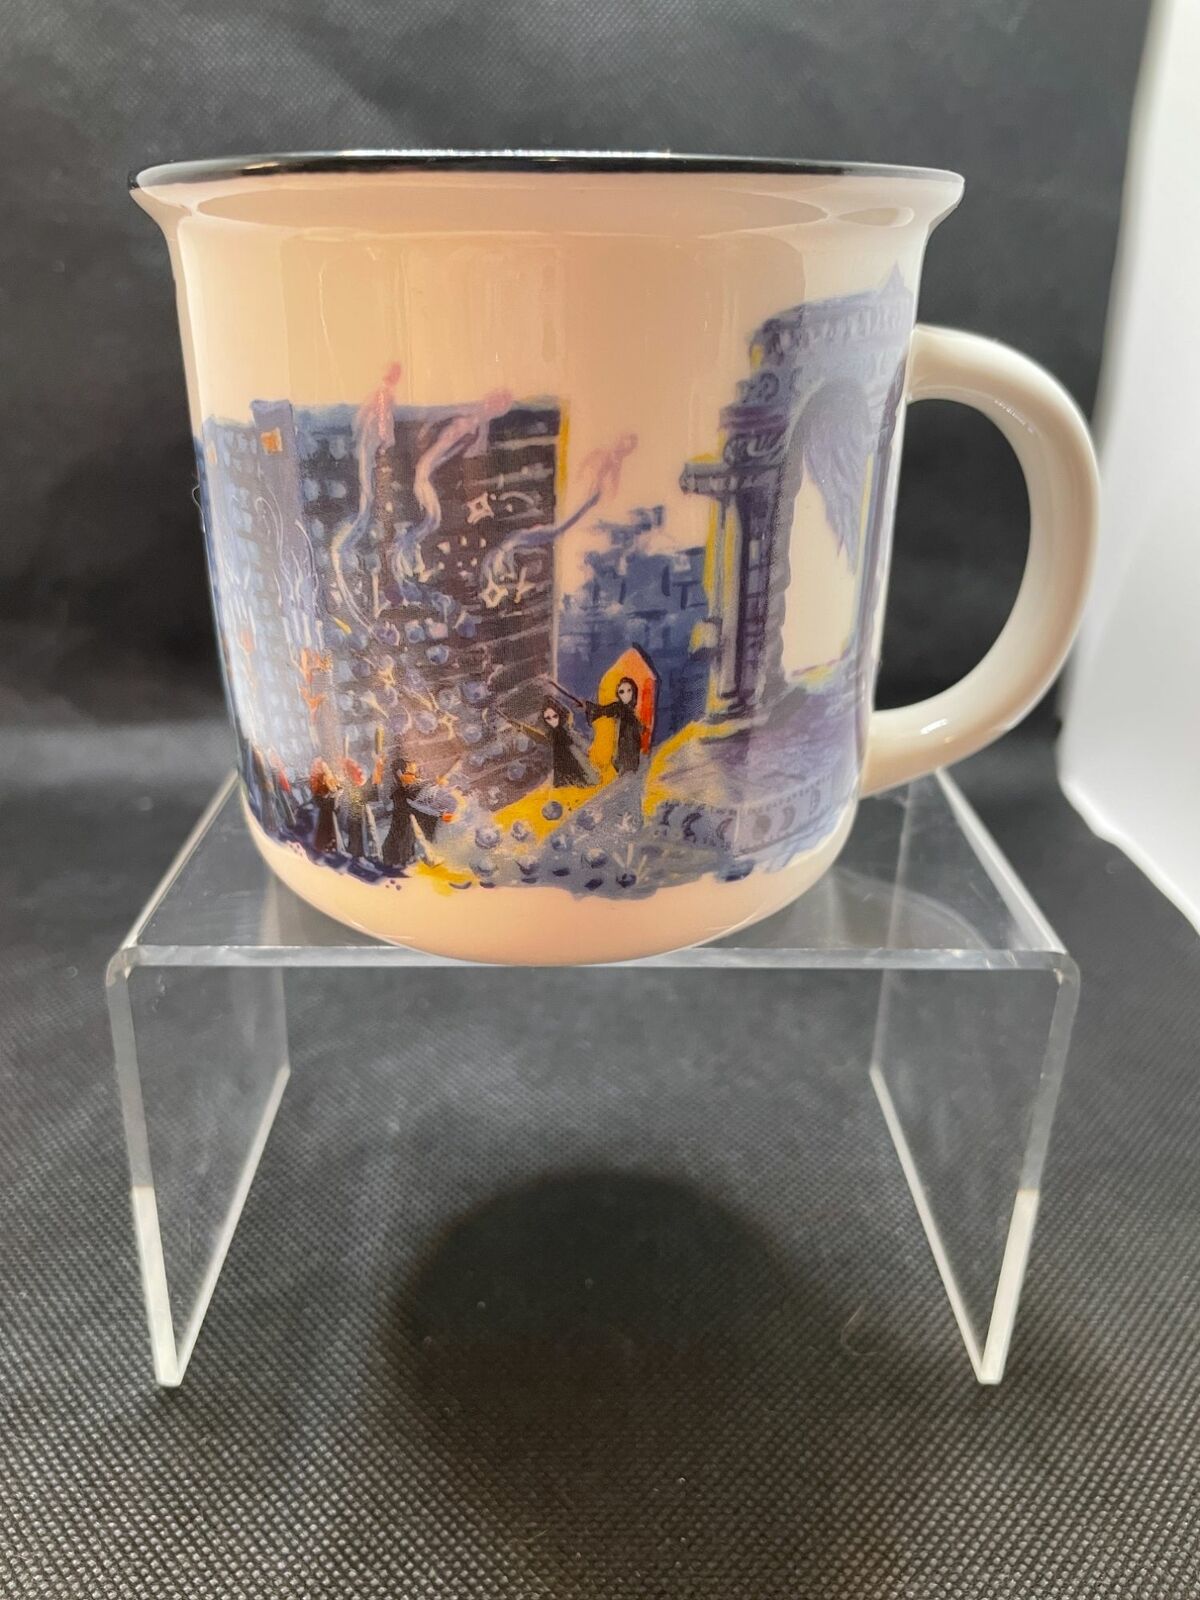 Owlcrate Exclusive Harry Potter Mug The Order Of The Phoenix Cara Kozik